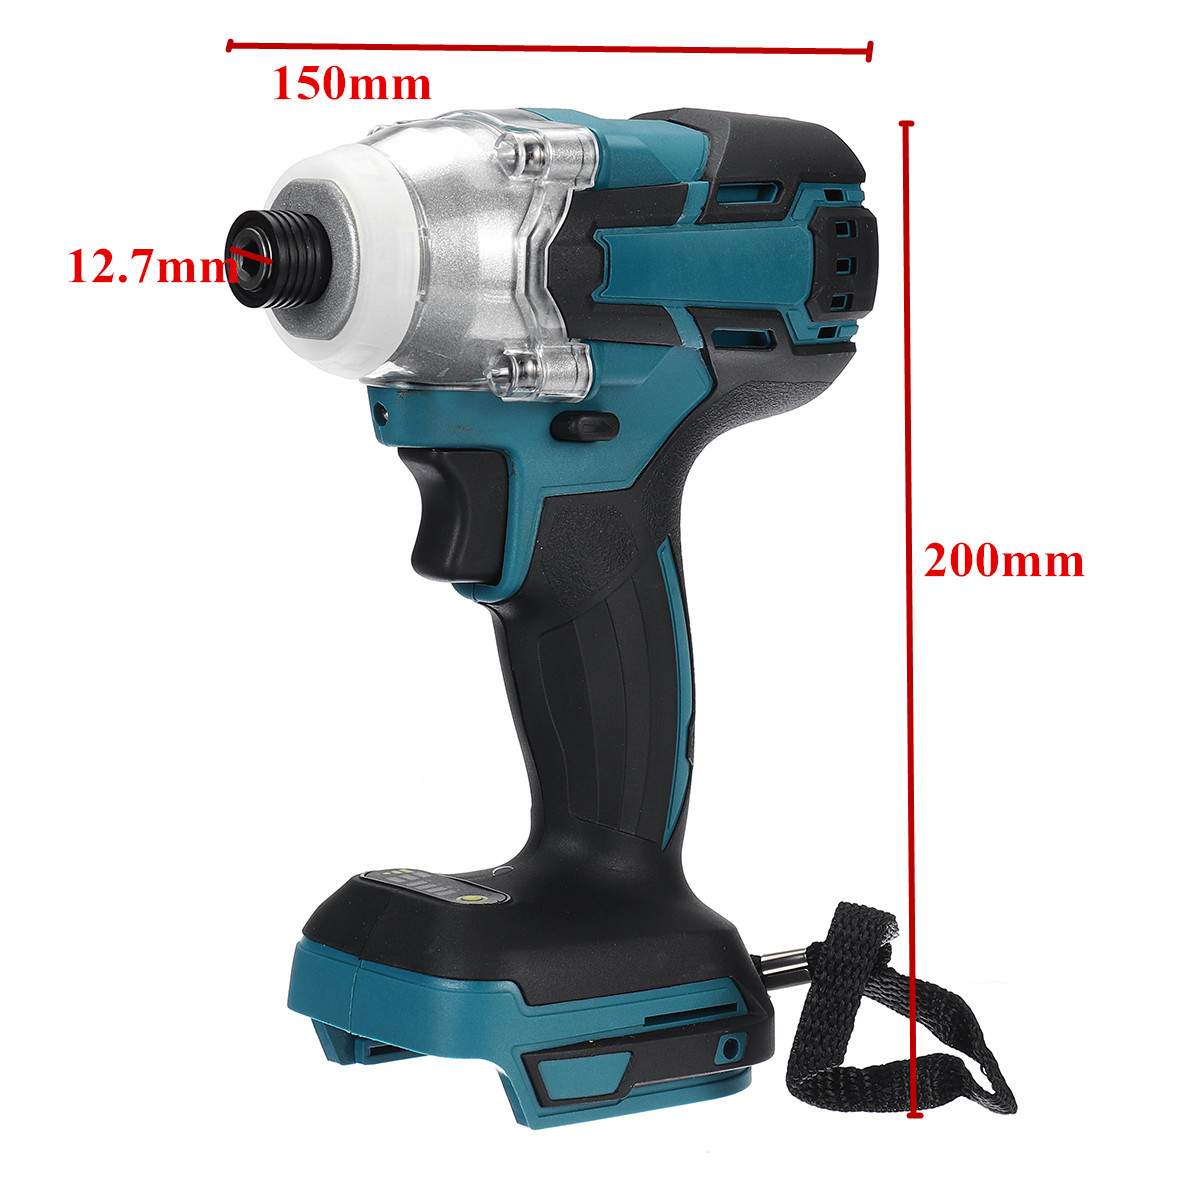 18V-520Nm-Cordless-Brushless-Impact-Electric-Screwdriver-Stepless-Speed-Rechargable-Driver-Adapted-T-1602644-5